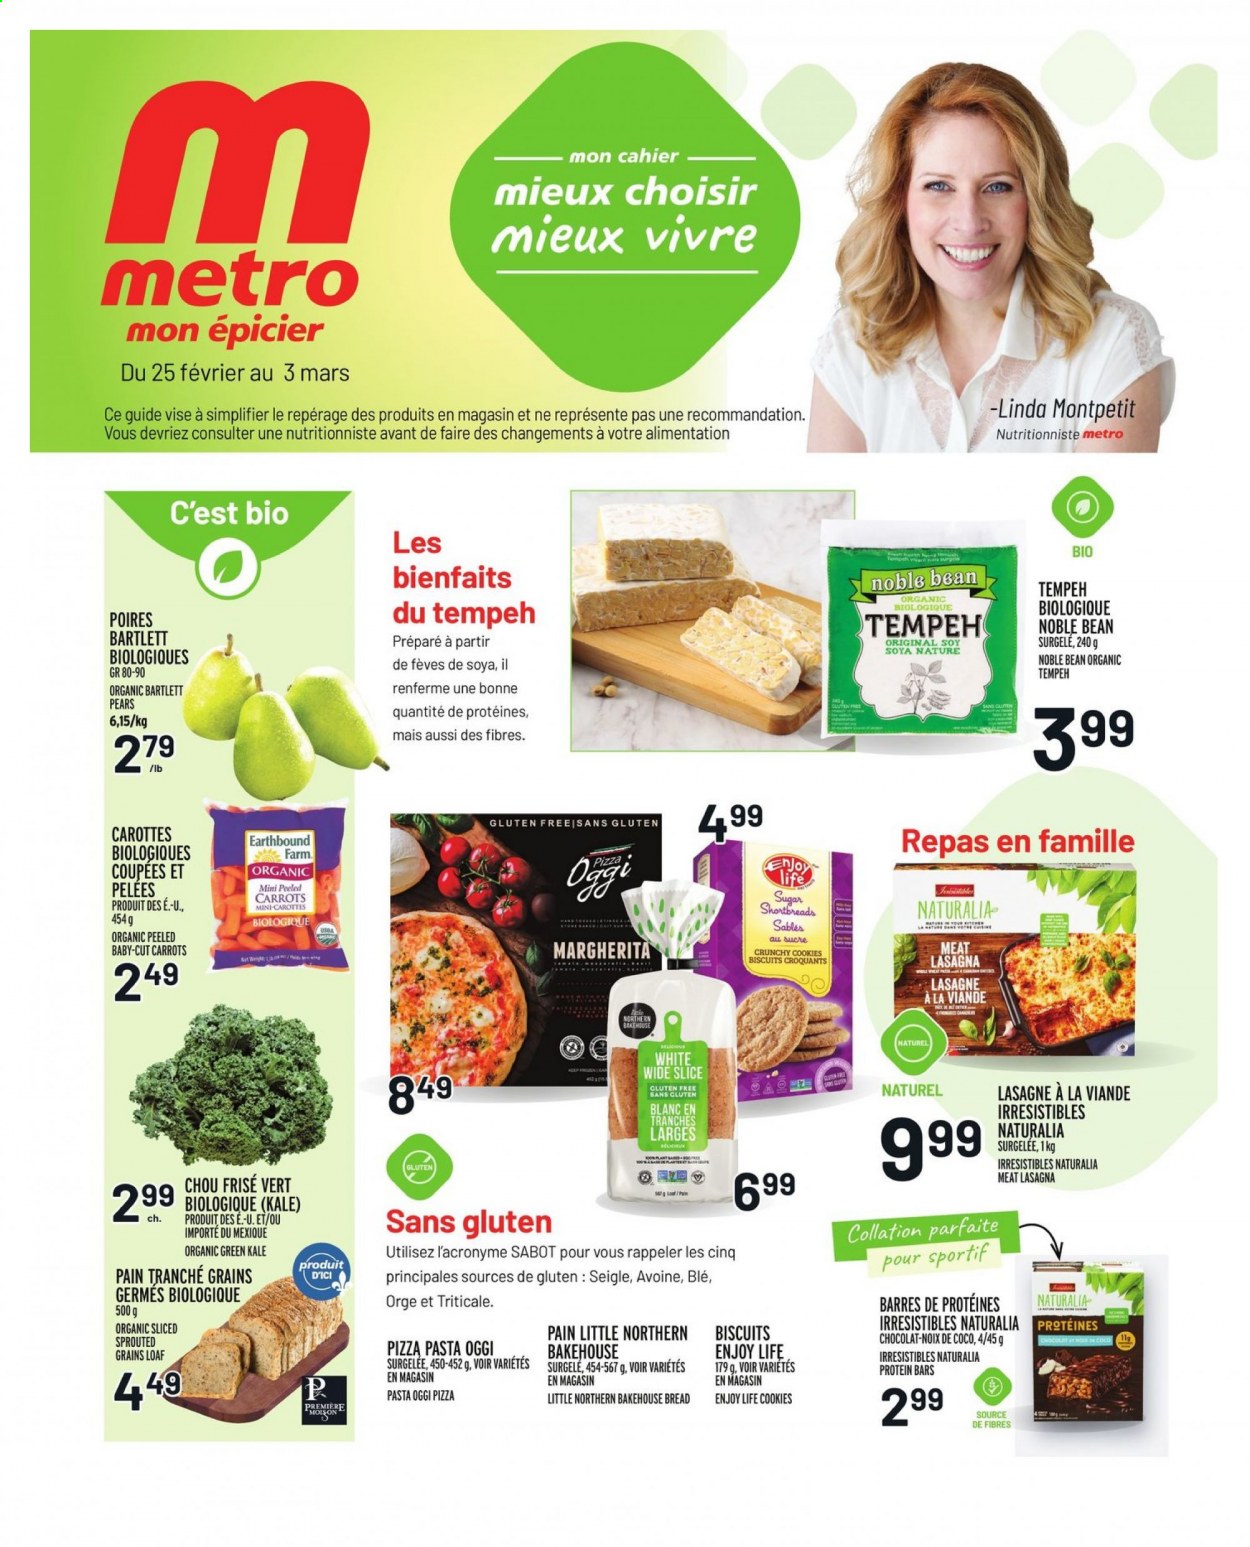 thumbnail - Metro Flyer - February 25, 2021 - March 03, 2021 - Sales products - bread, carrots, kale, Bartlett pears, pears, pizza, pasta, lasagna meal, cookies, Mars, biscuit, sugar, protein bar, PREMIERE. Page 1.